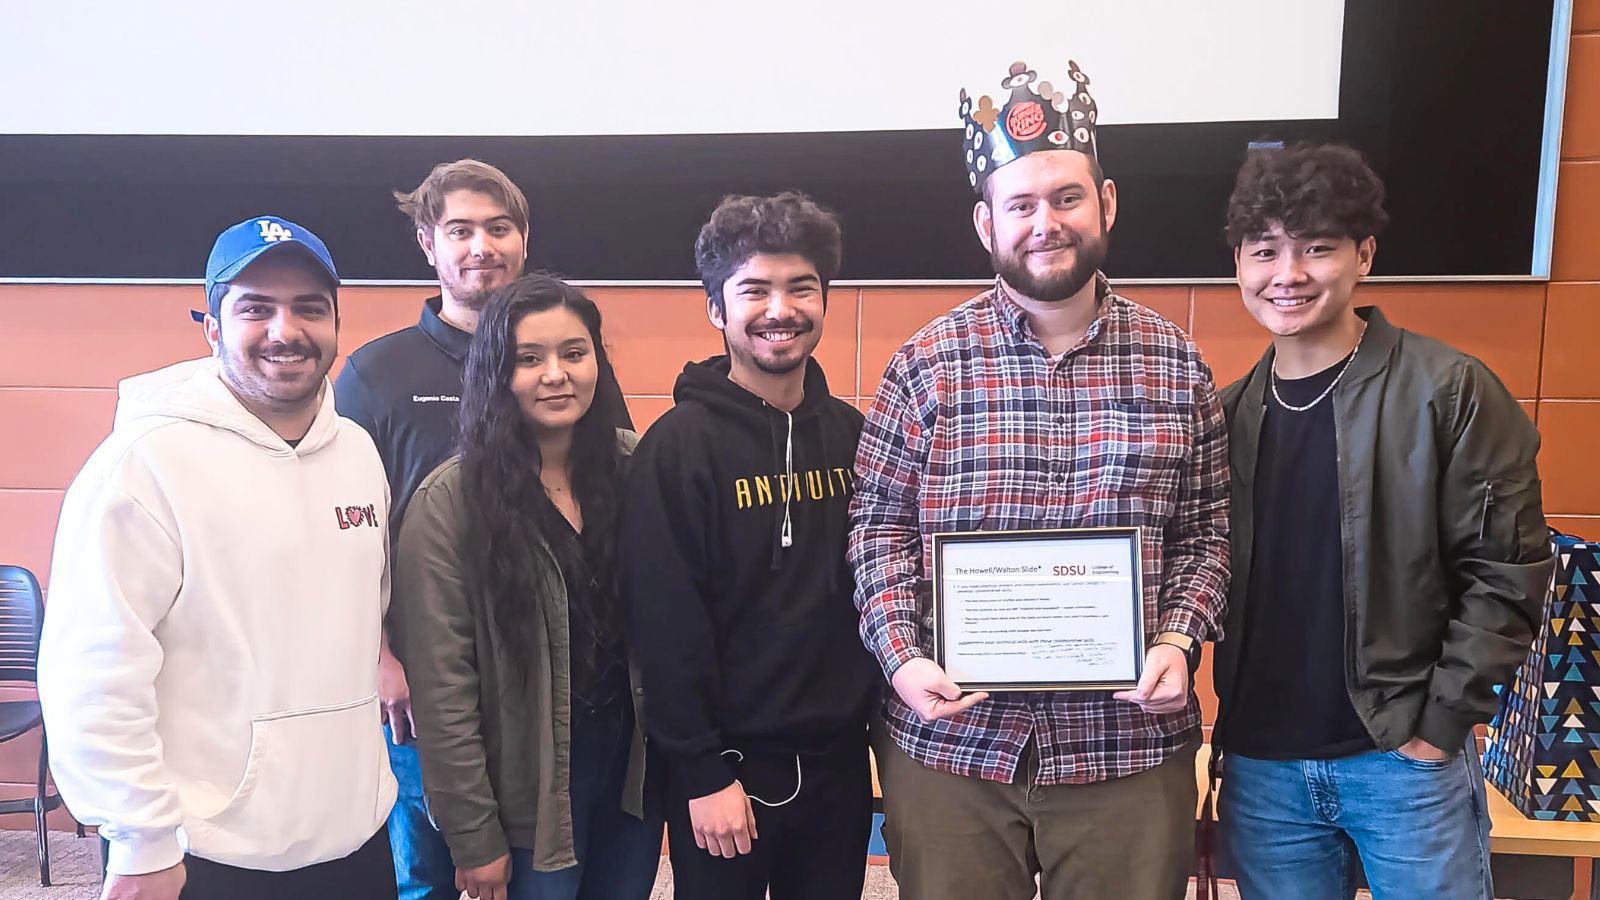 Electrical engineering senior Cyrus Yousefian has been recognized with the 2023 Howell Walton Award by his Senior Design course for his excellent leadership, management, technical, and collaborative skills.